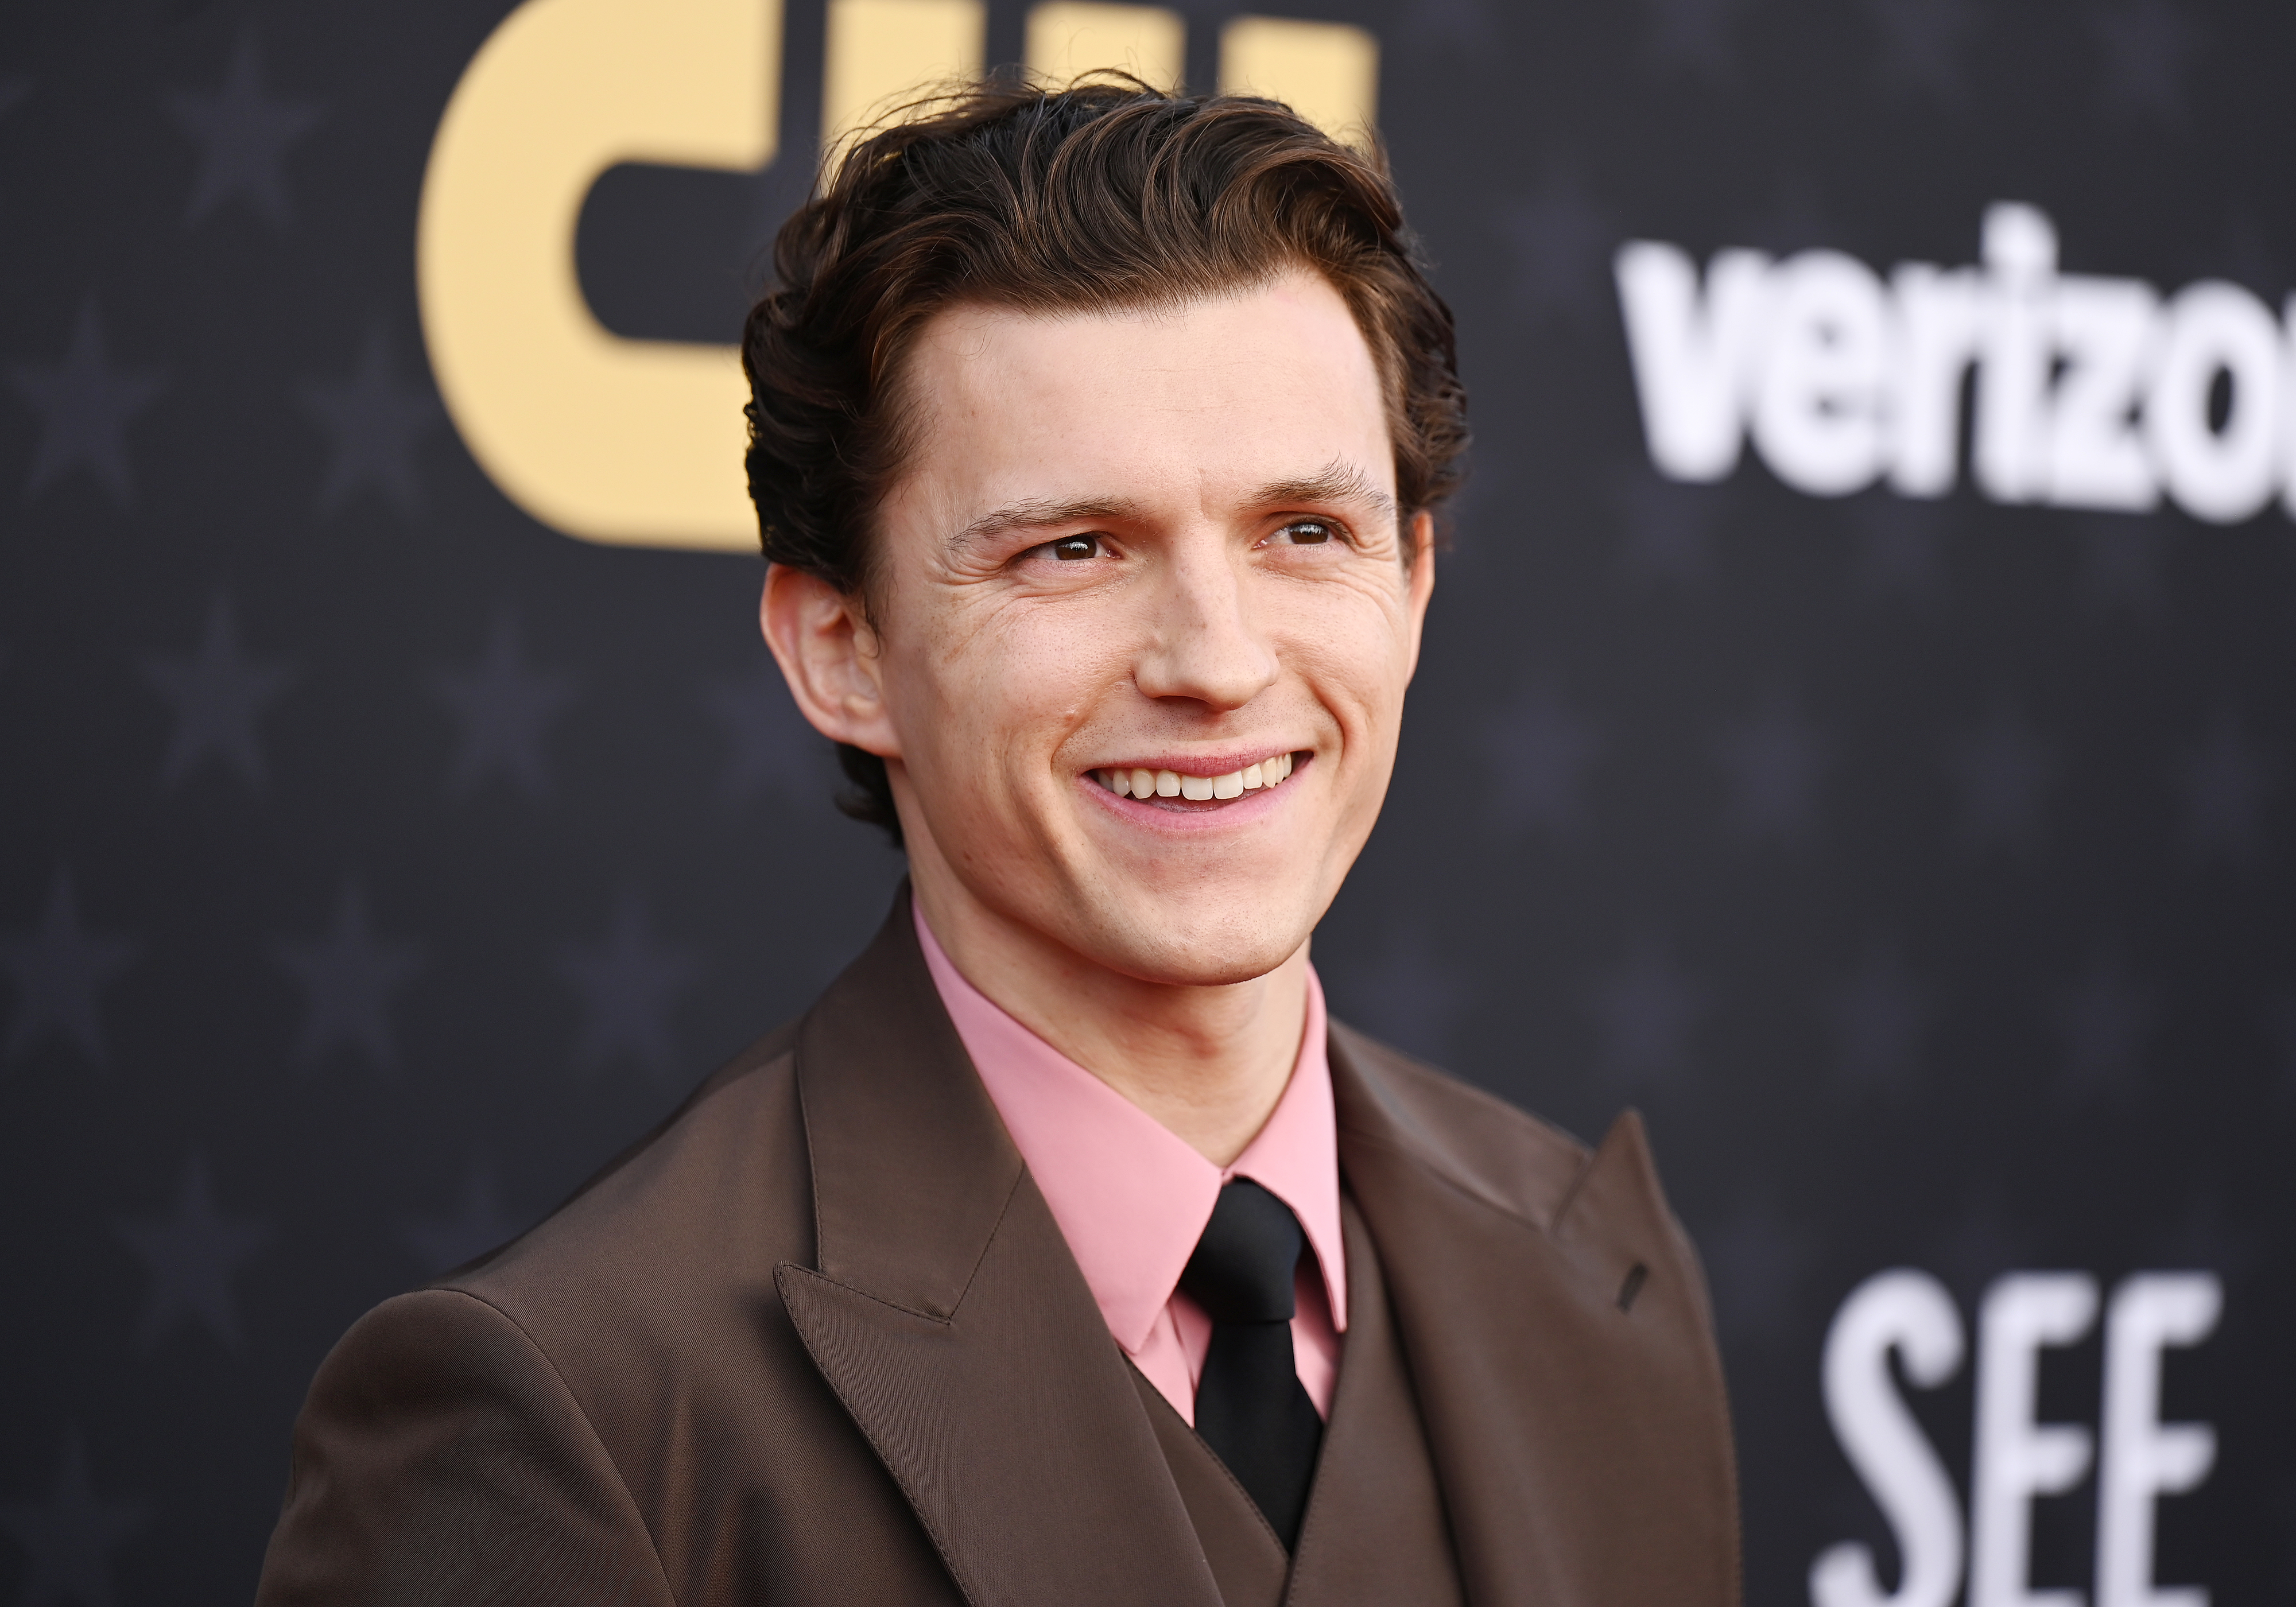 Tom Holland in a brown suit with a pink tie, smiling on the red carpet